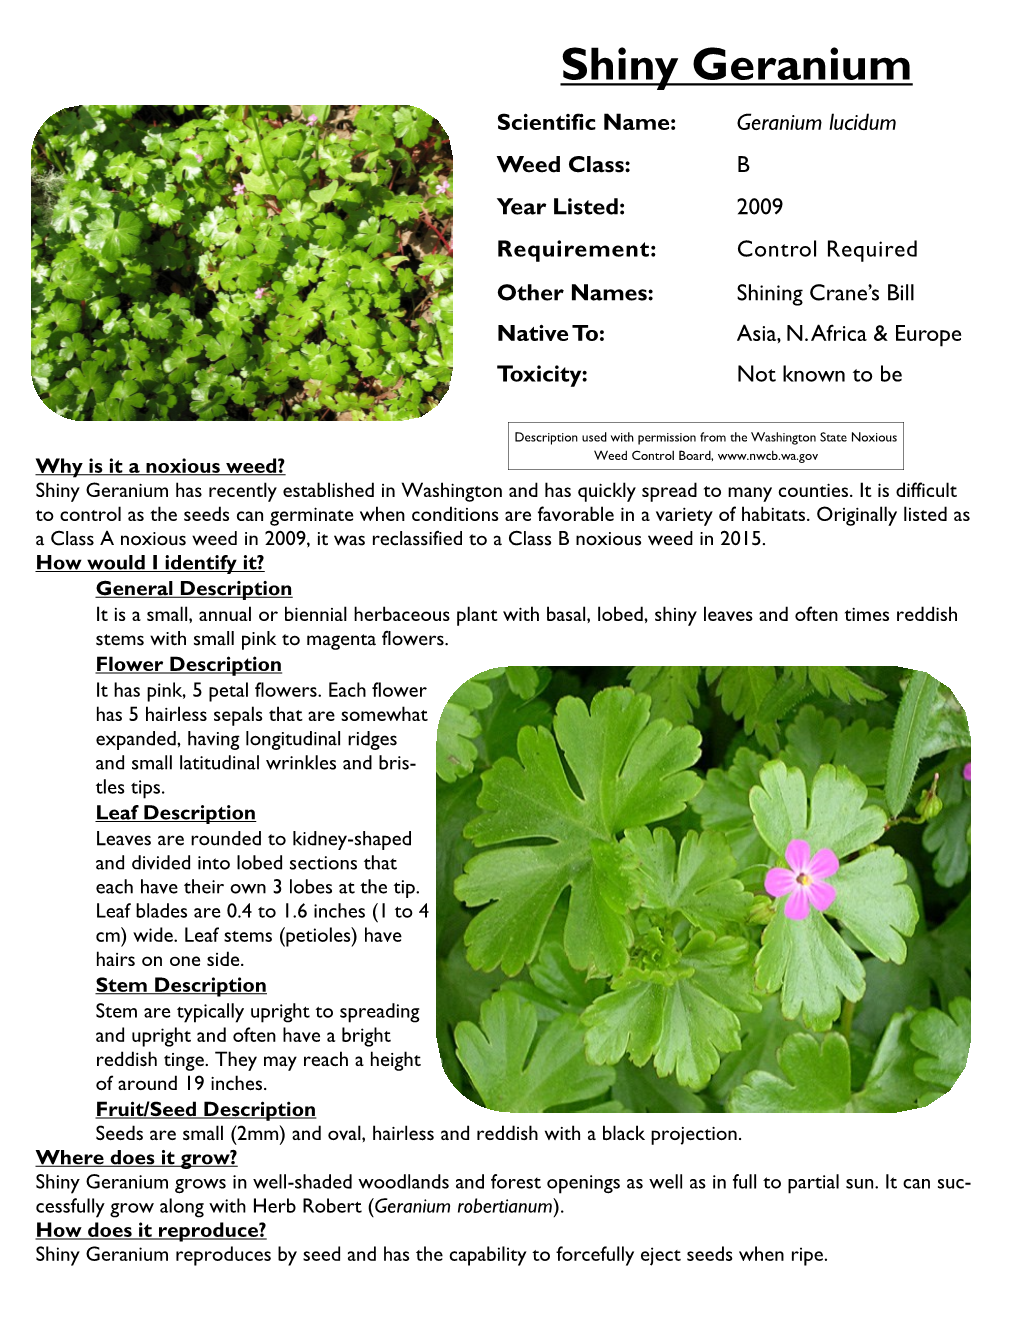 Shiny Geranium Scientific Name: Geranium Lucidum Weed Class: B Year Listed: 2009 Requirement: Control Required Other Names: Shining Crane’S Bill Native To: Asia, N